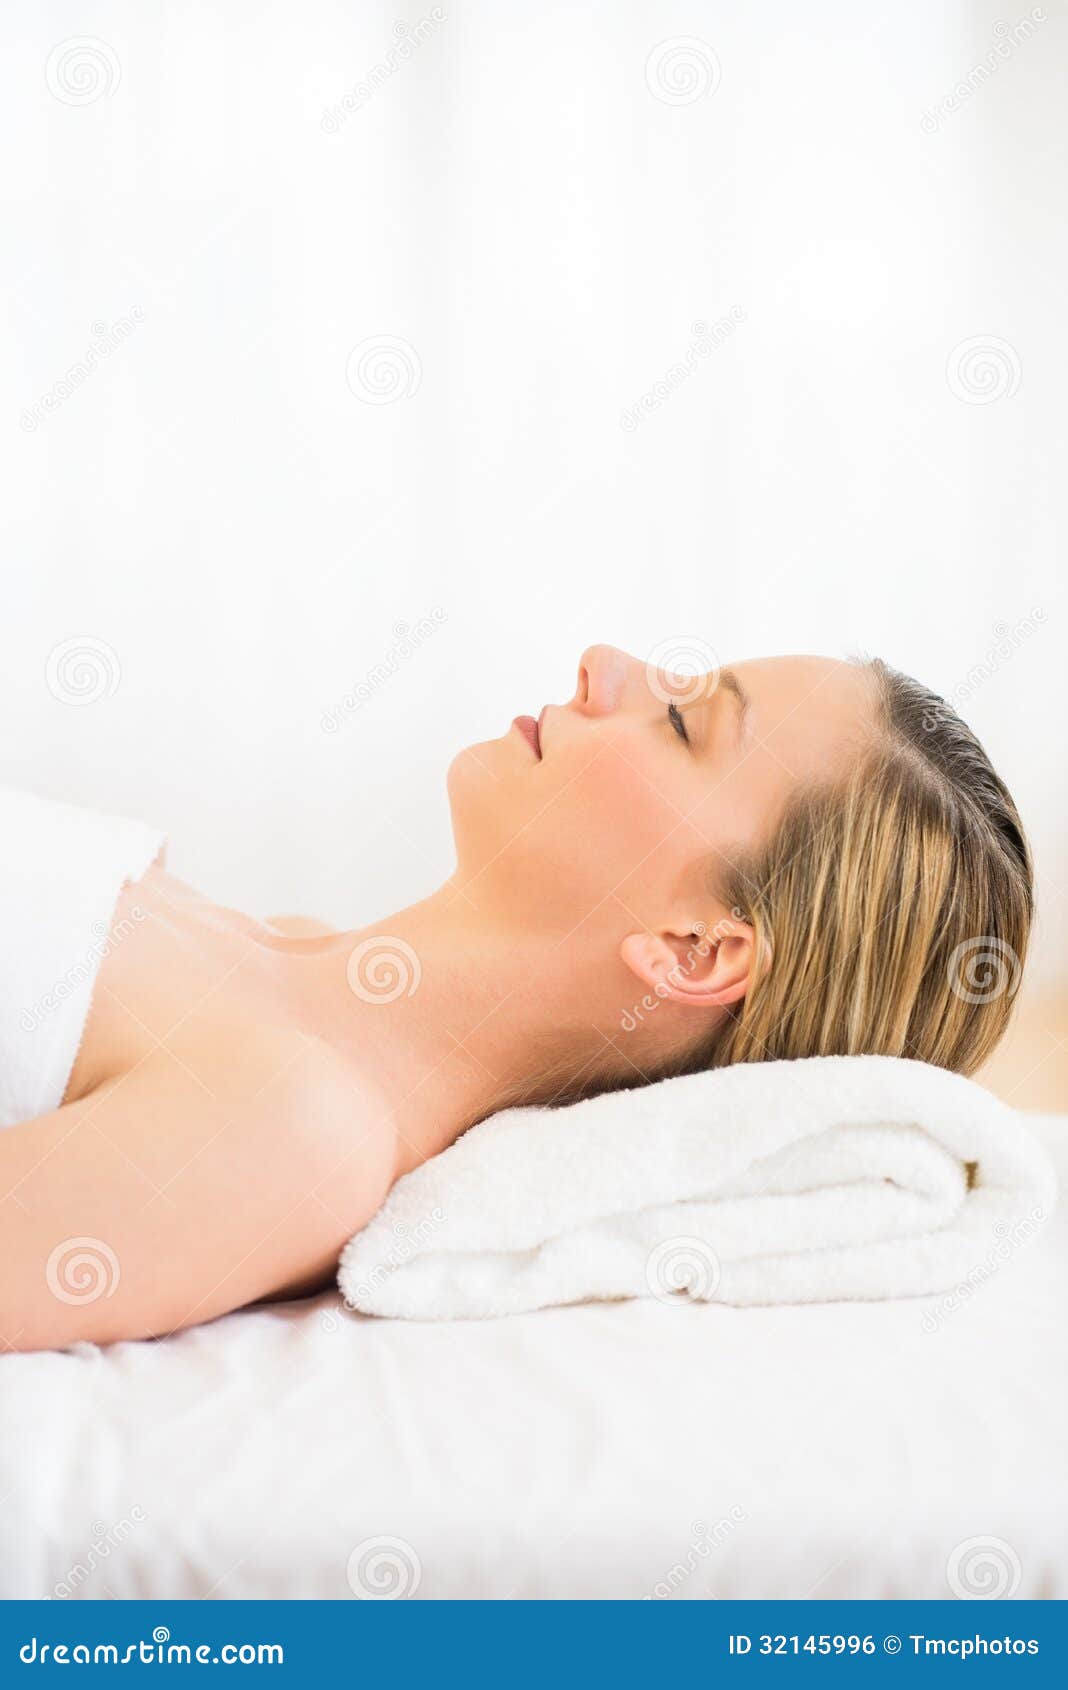 Woman Sleeping On Massage Table At Health Spa Royalty Free Stock Image Image 32145996